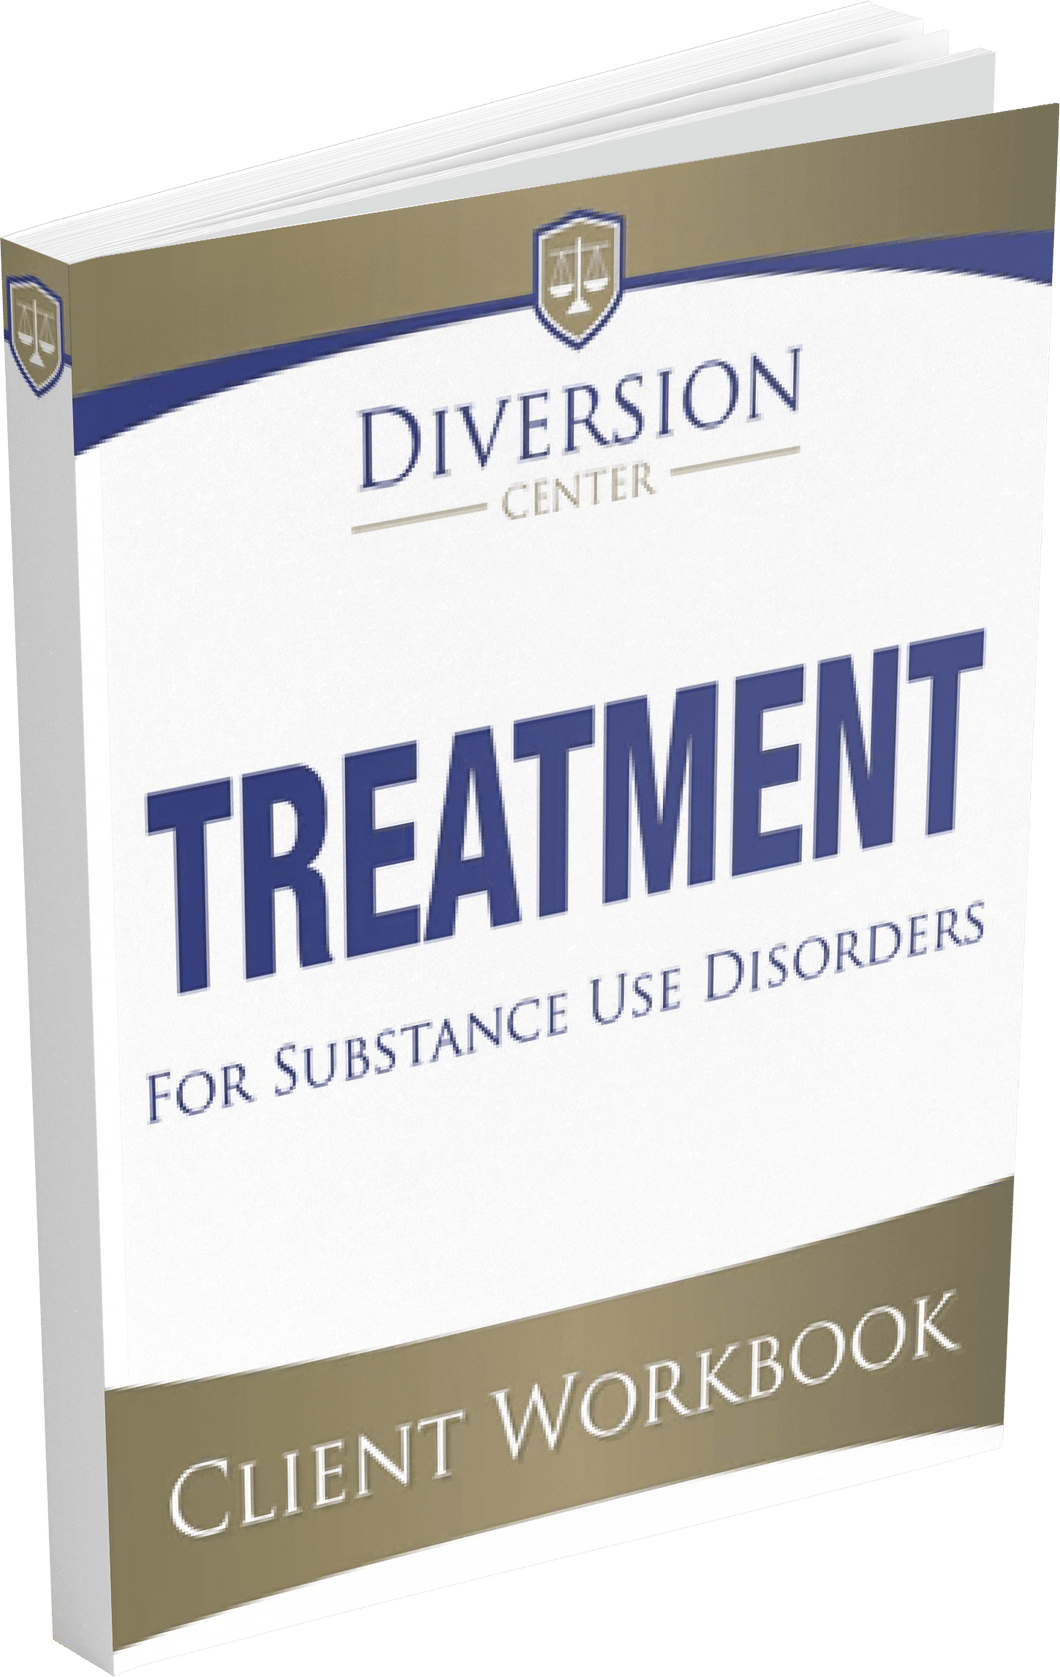 Treatment for Substance Use Disorders